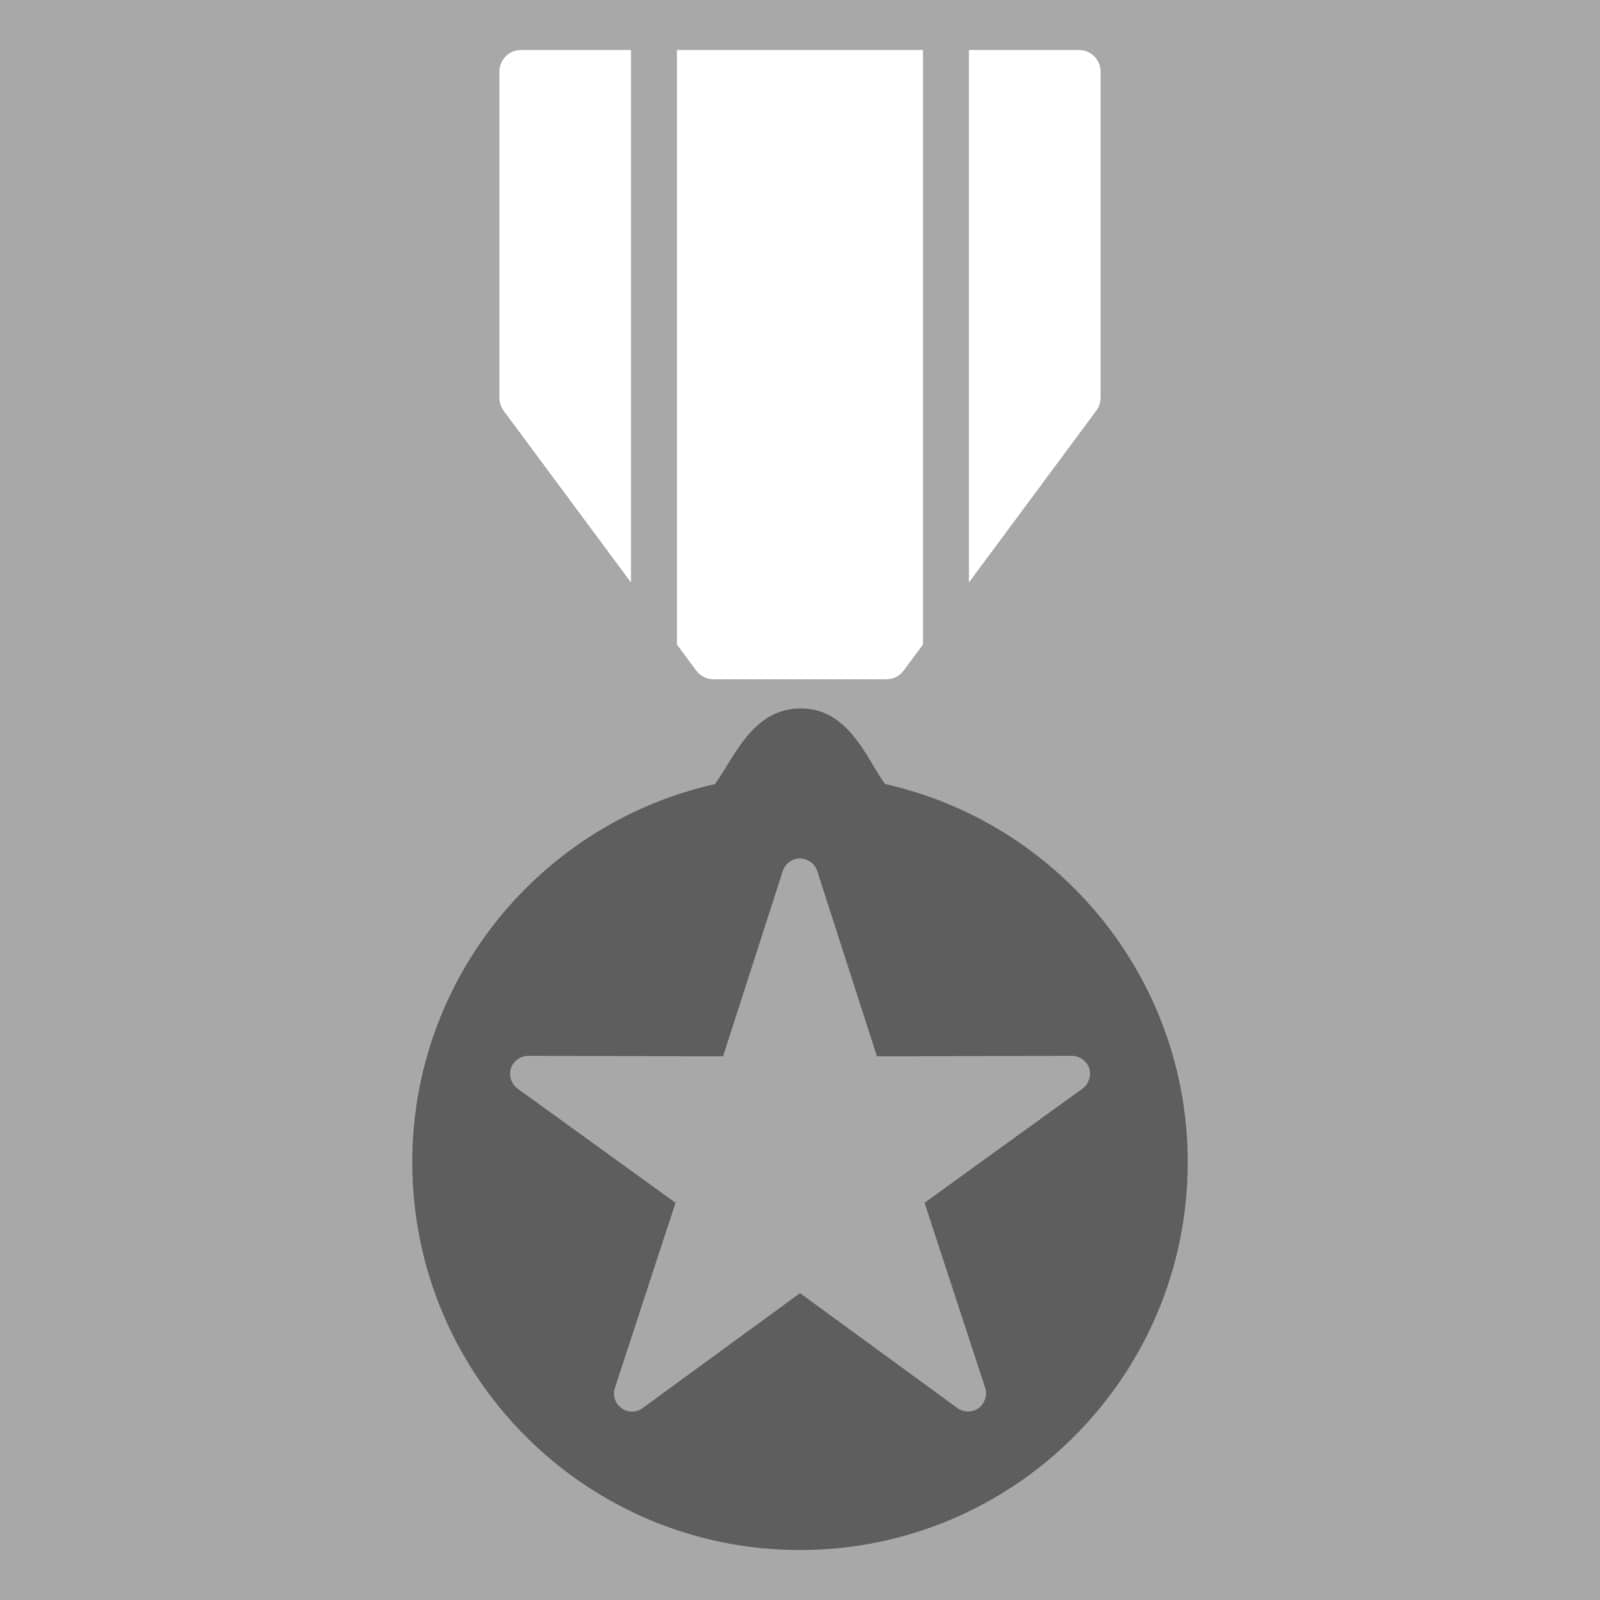 Army award icon from Competition & Success Bicolor Icon Set. Vector style is flat bicolor symbols, dark gray and white colors, rounded angles, silver background.